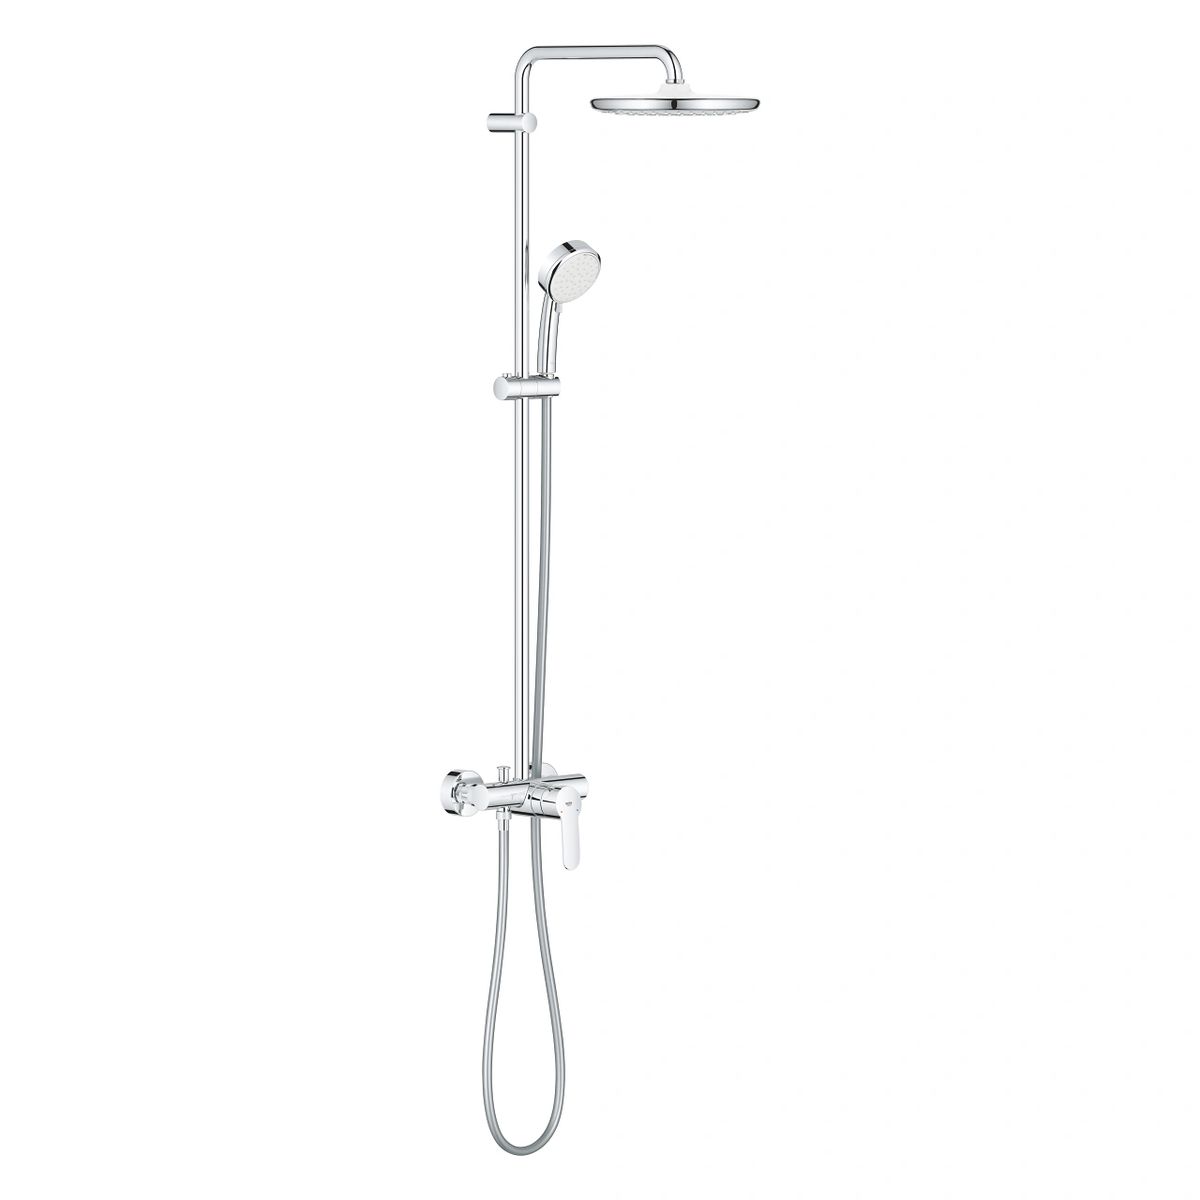 GROHE TEMPESTA COSMOPOLITAN SYSTEM 250 SHOWER SYSTEM WITH SINGLE LEVER  MIXER FOR WALL MOUNTING